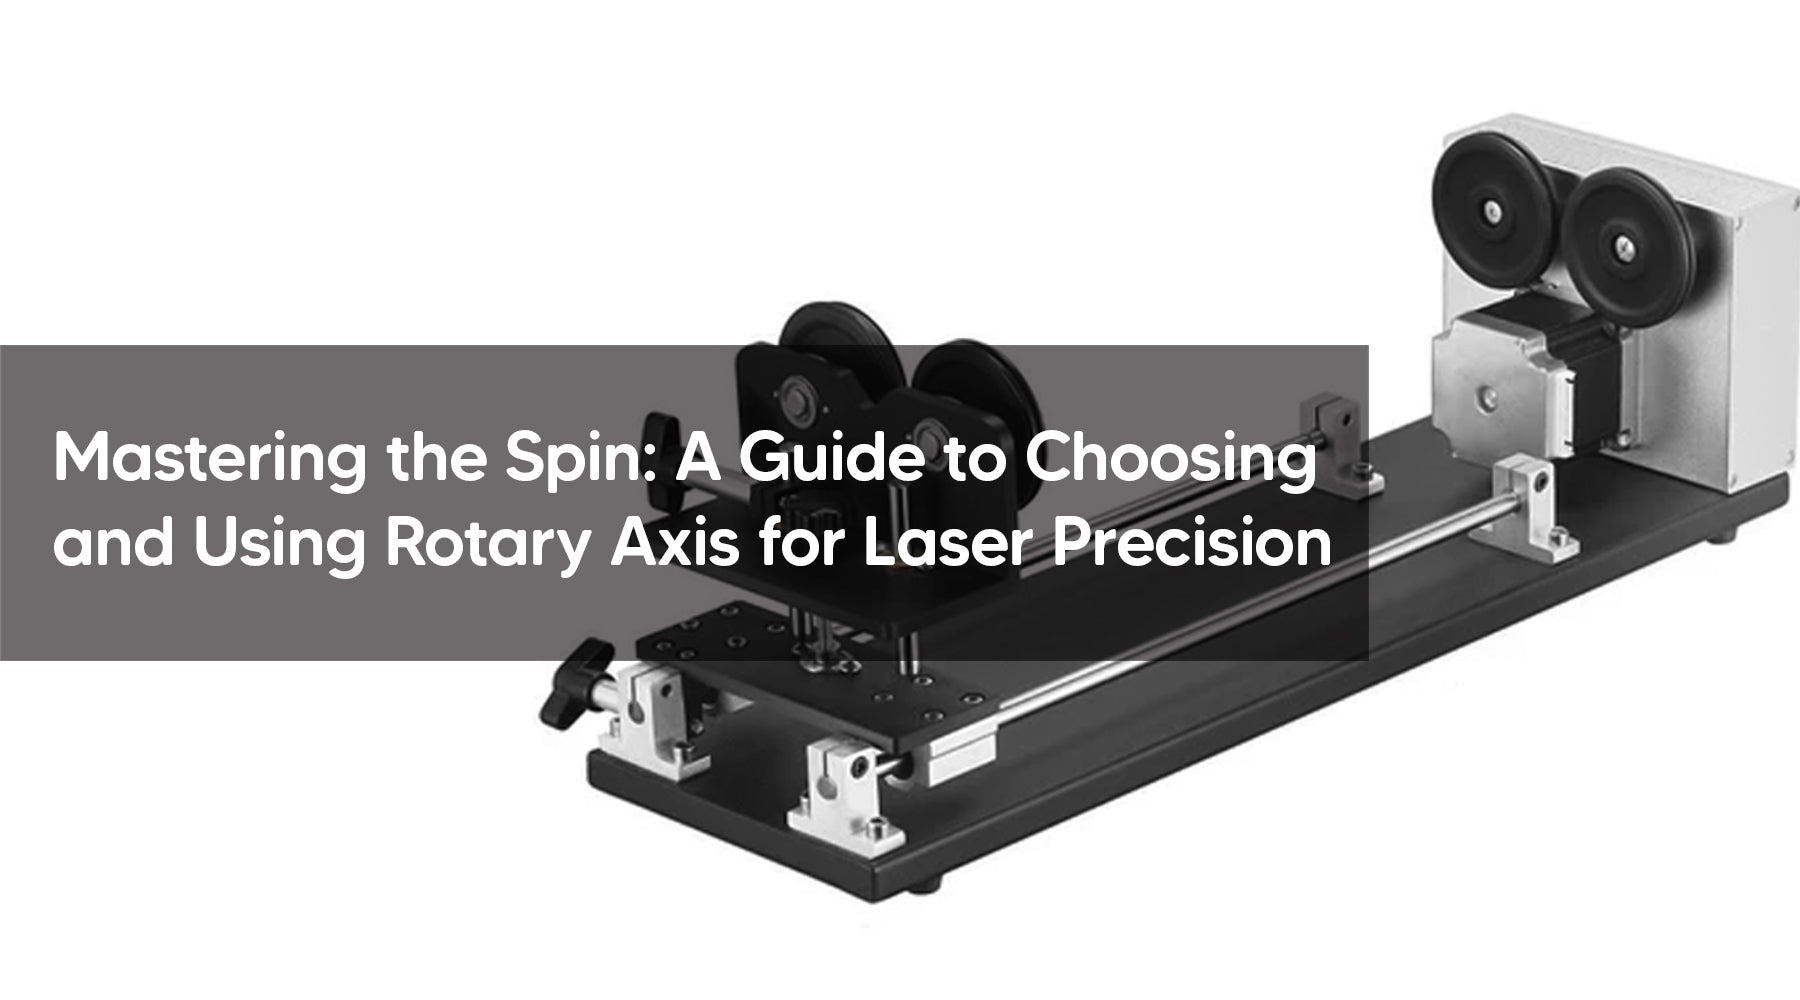 Mastering the Spin: A Guide to Choosing and Using Rotary Axis for Laser Precision